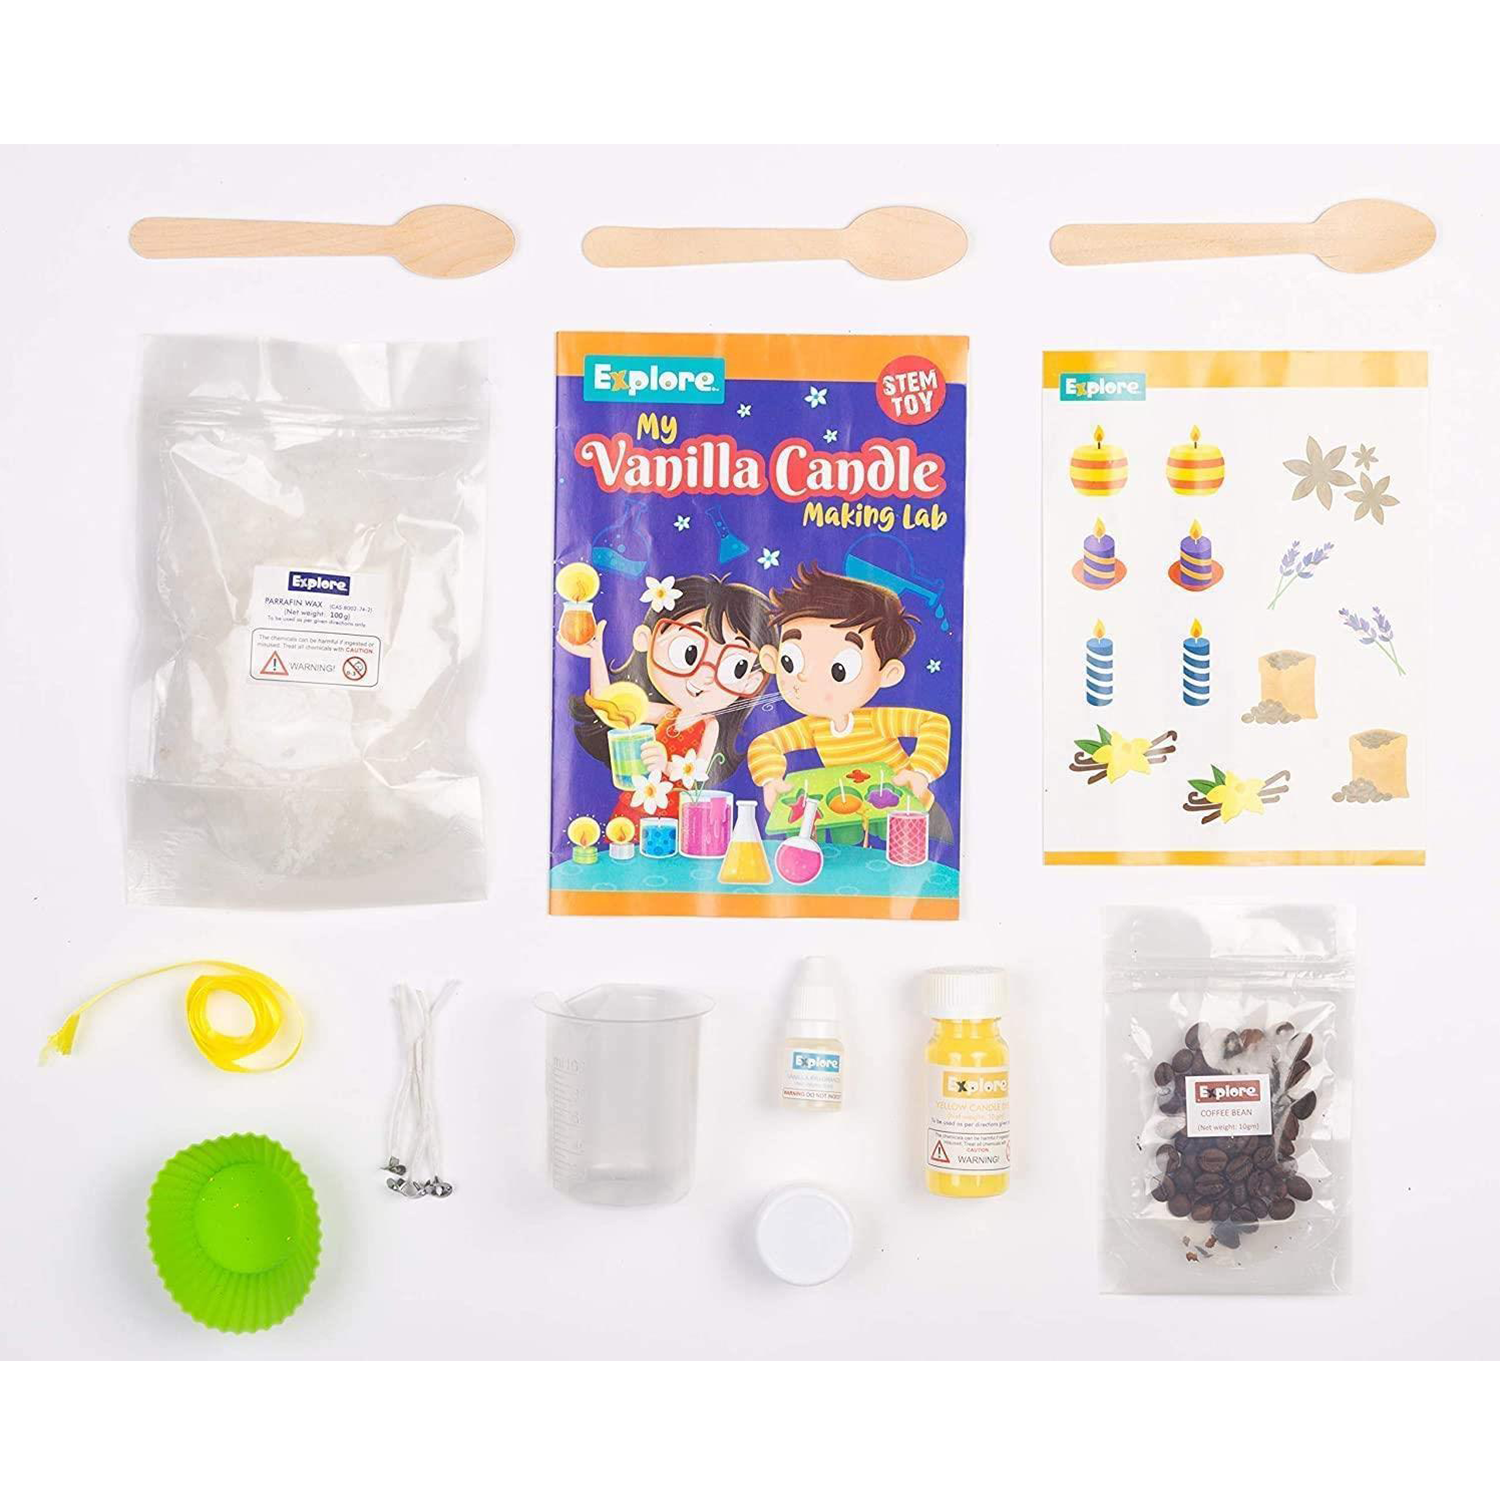 Vonadale Do-It-Yourself Scented Candle Making Kit for Kids with Instructions